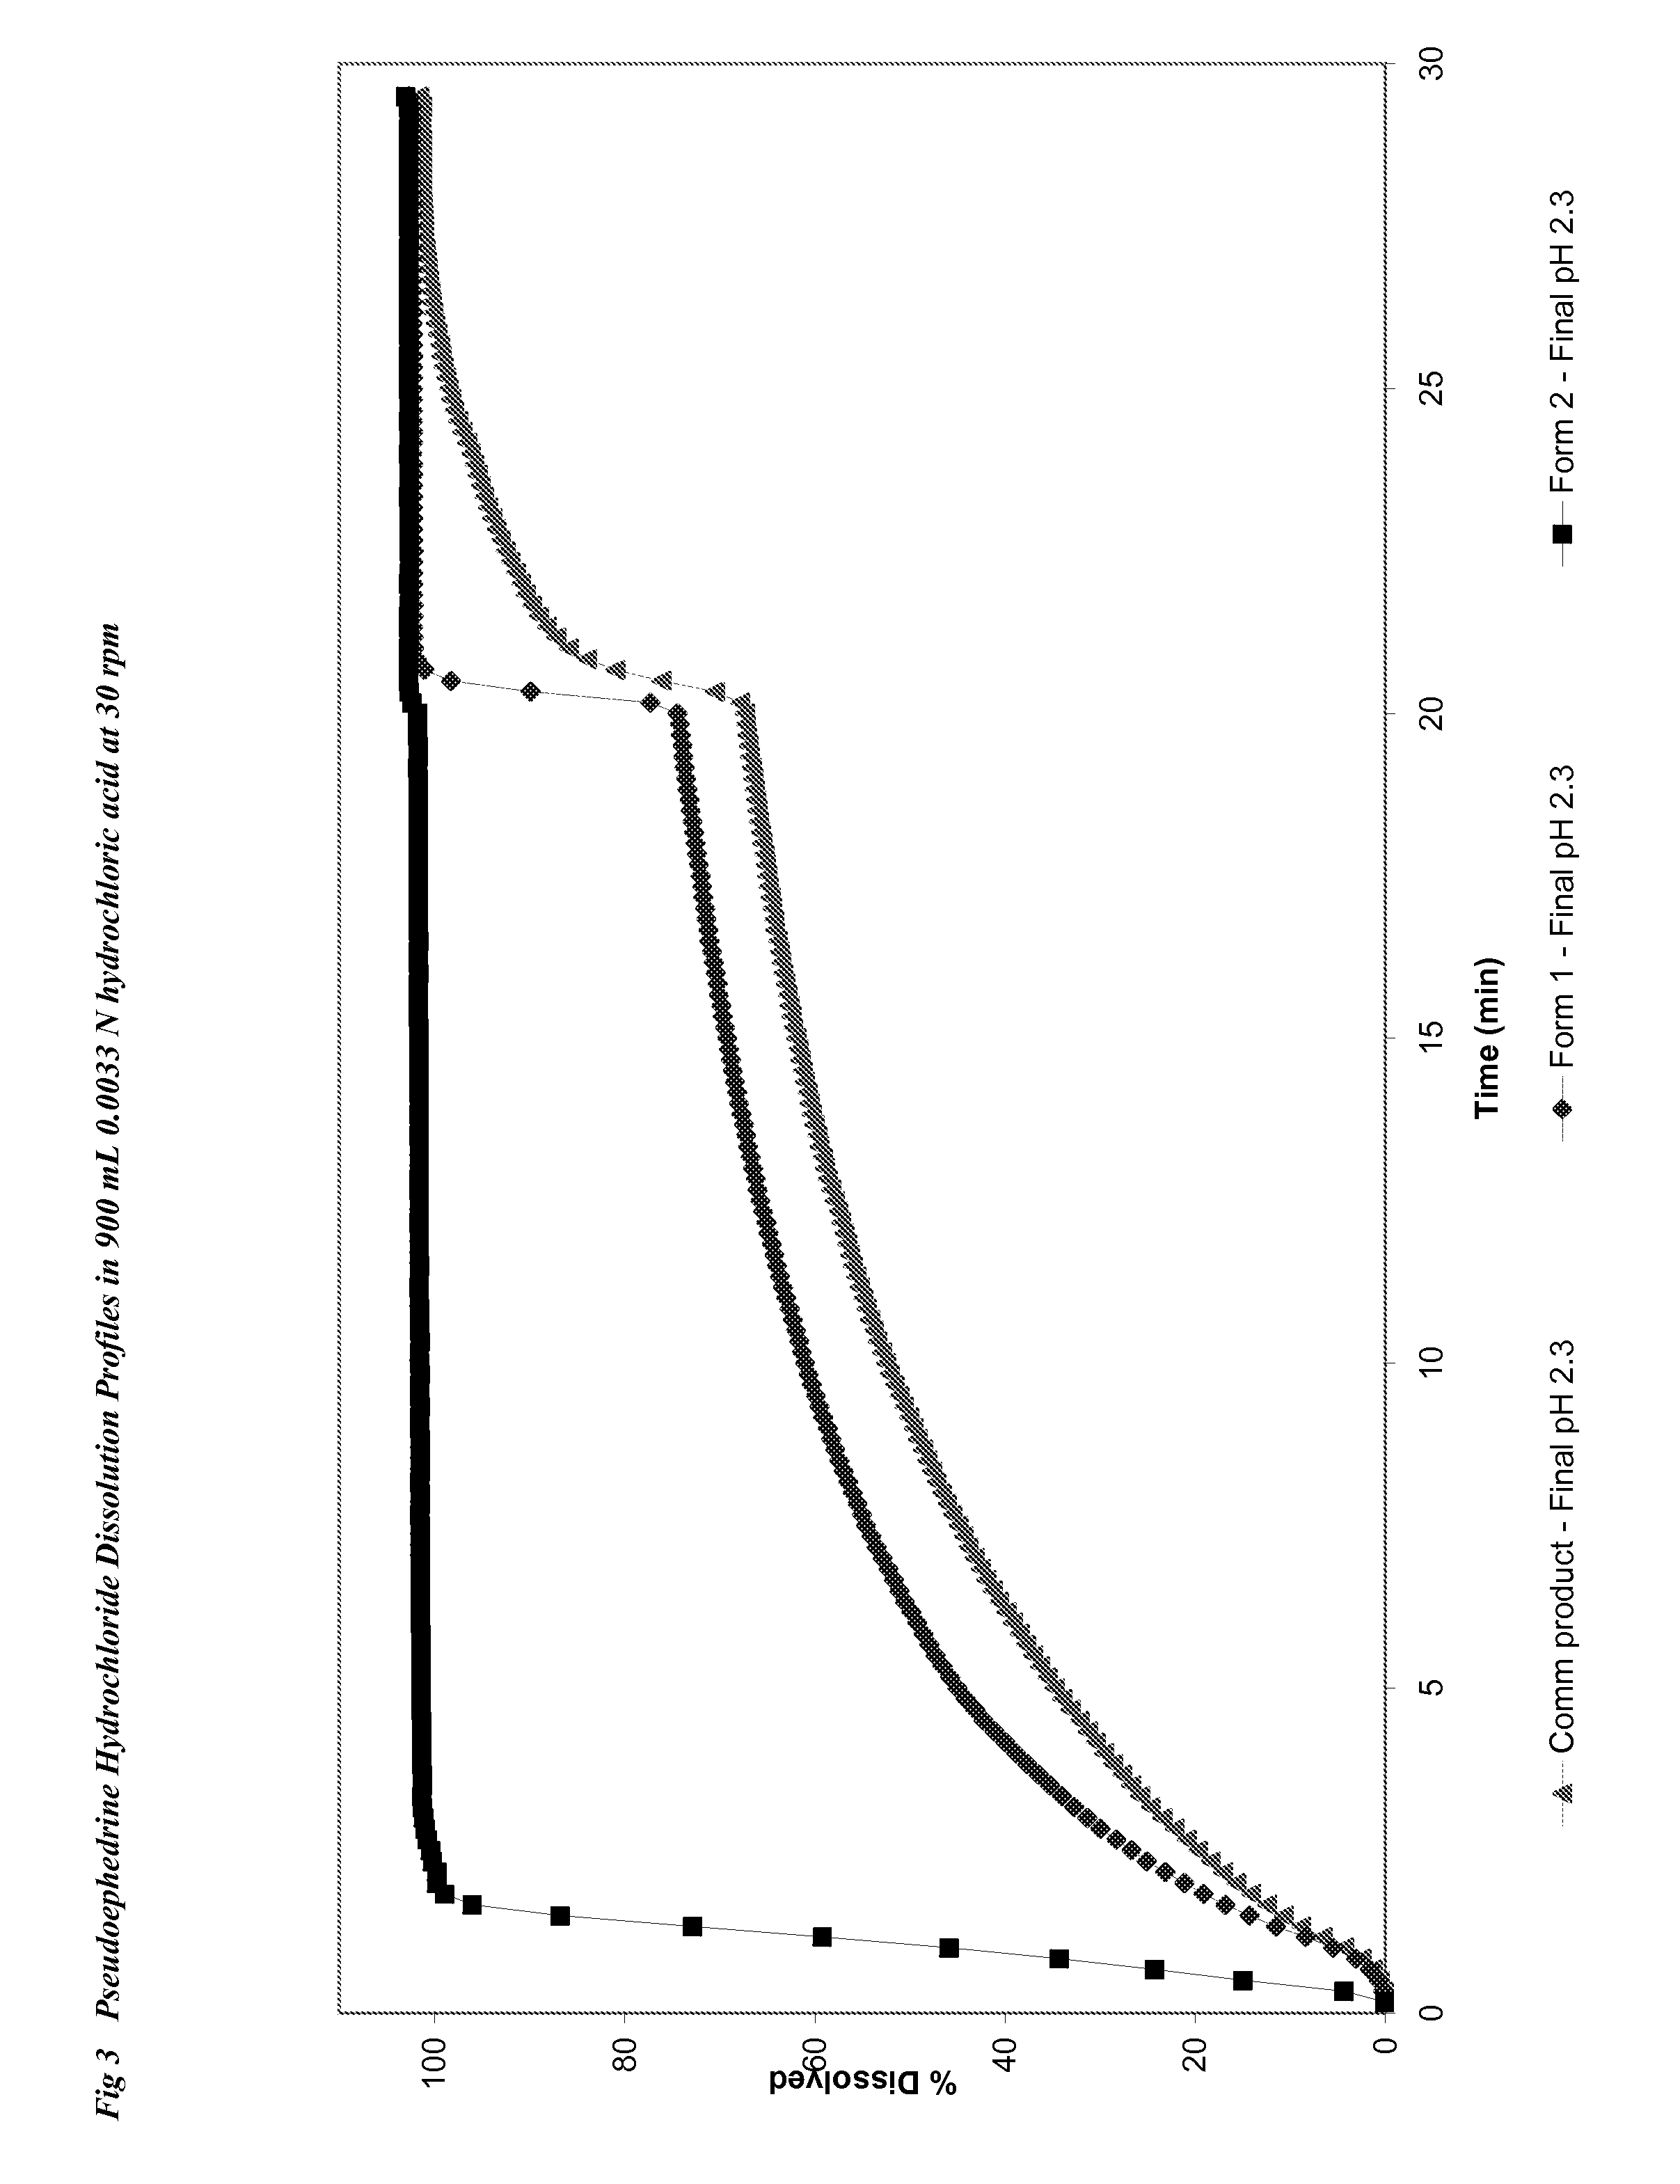 Oral therapeutic compound delivery system